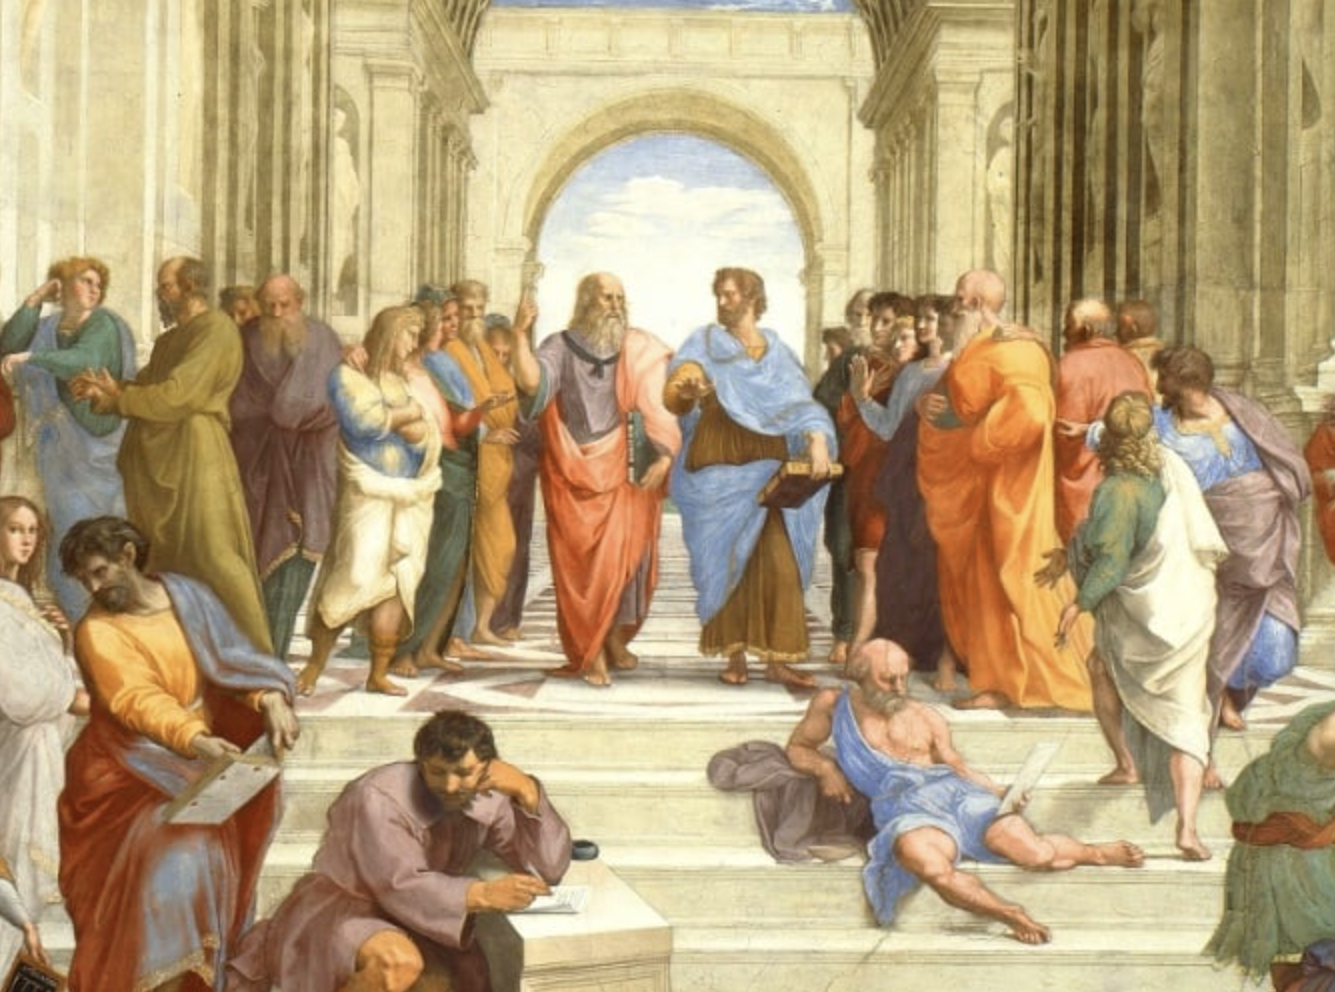 “Plato, Socrates and Aristotle. Some people seem to just think of them as philosophers, which is true but their notions of justice and government are what Greeks, the Romans and most Western nations today have used to shape their cultures/societies.” —ShivasKratom3